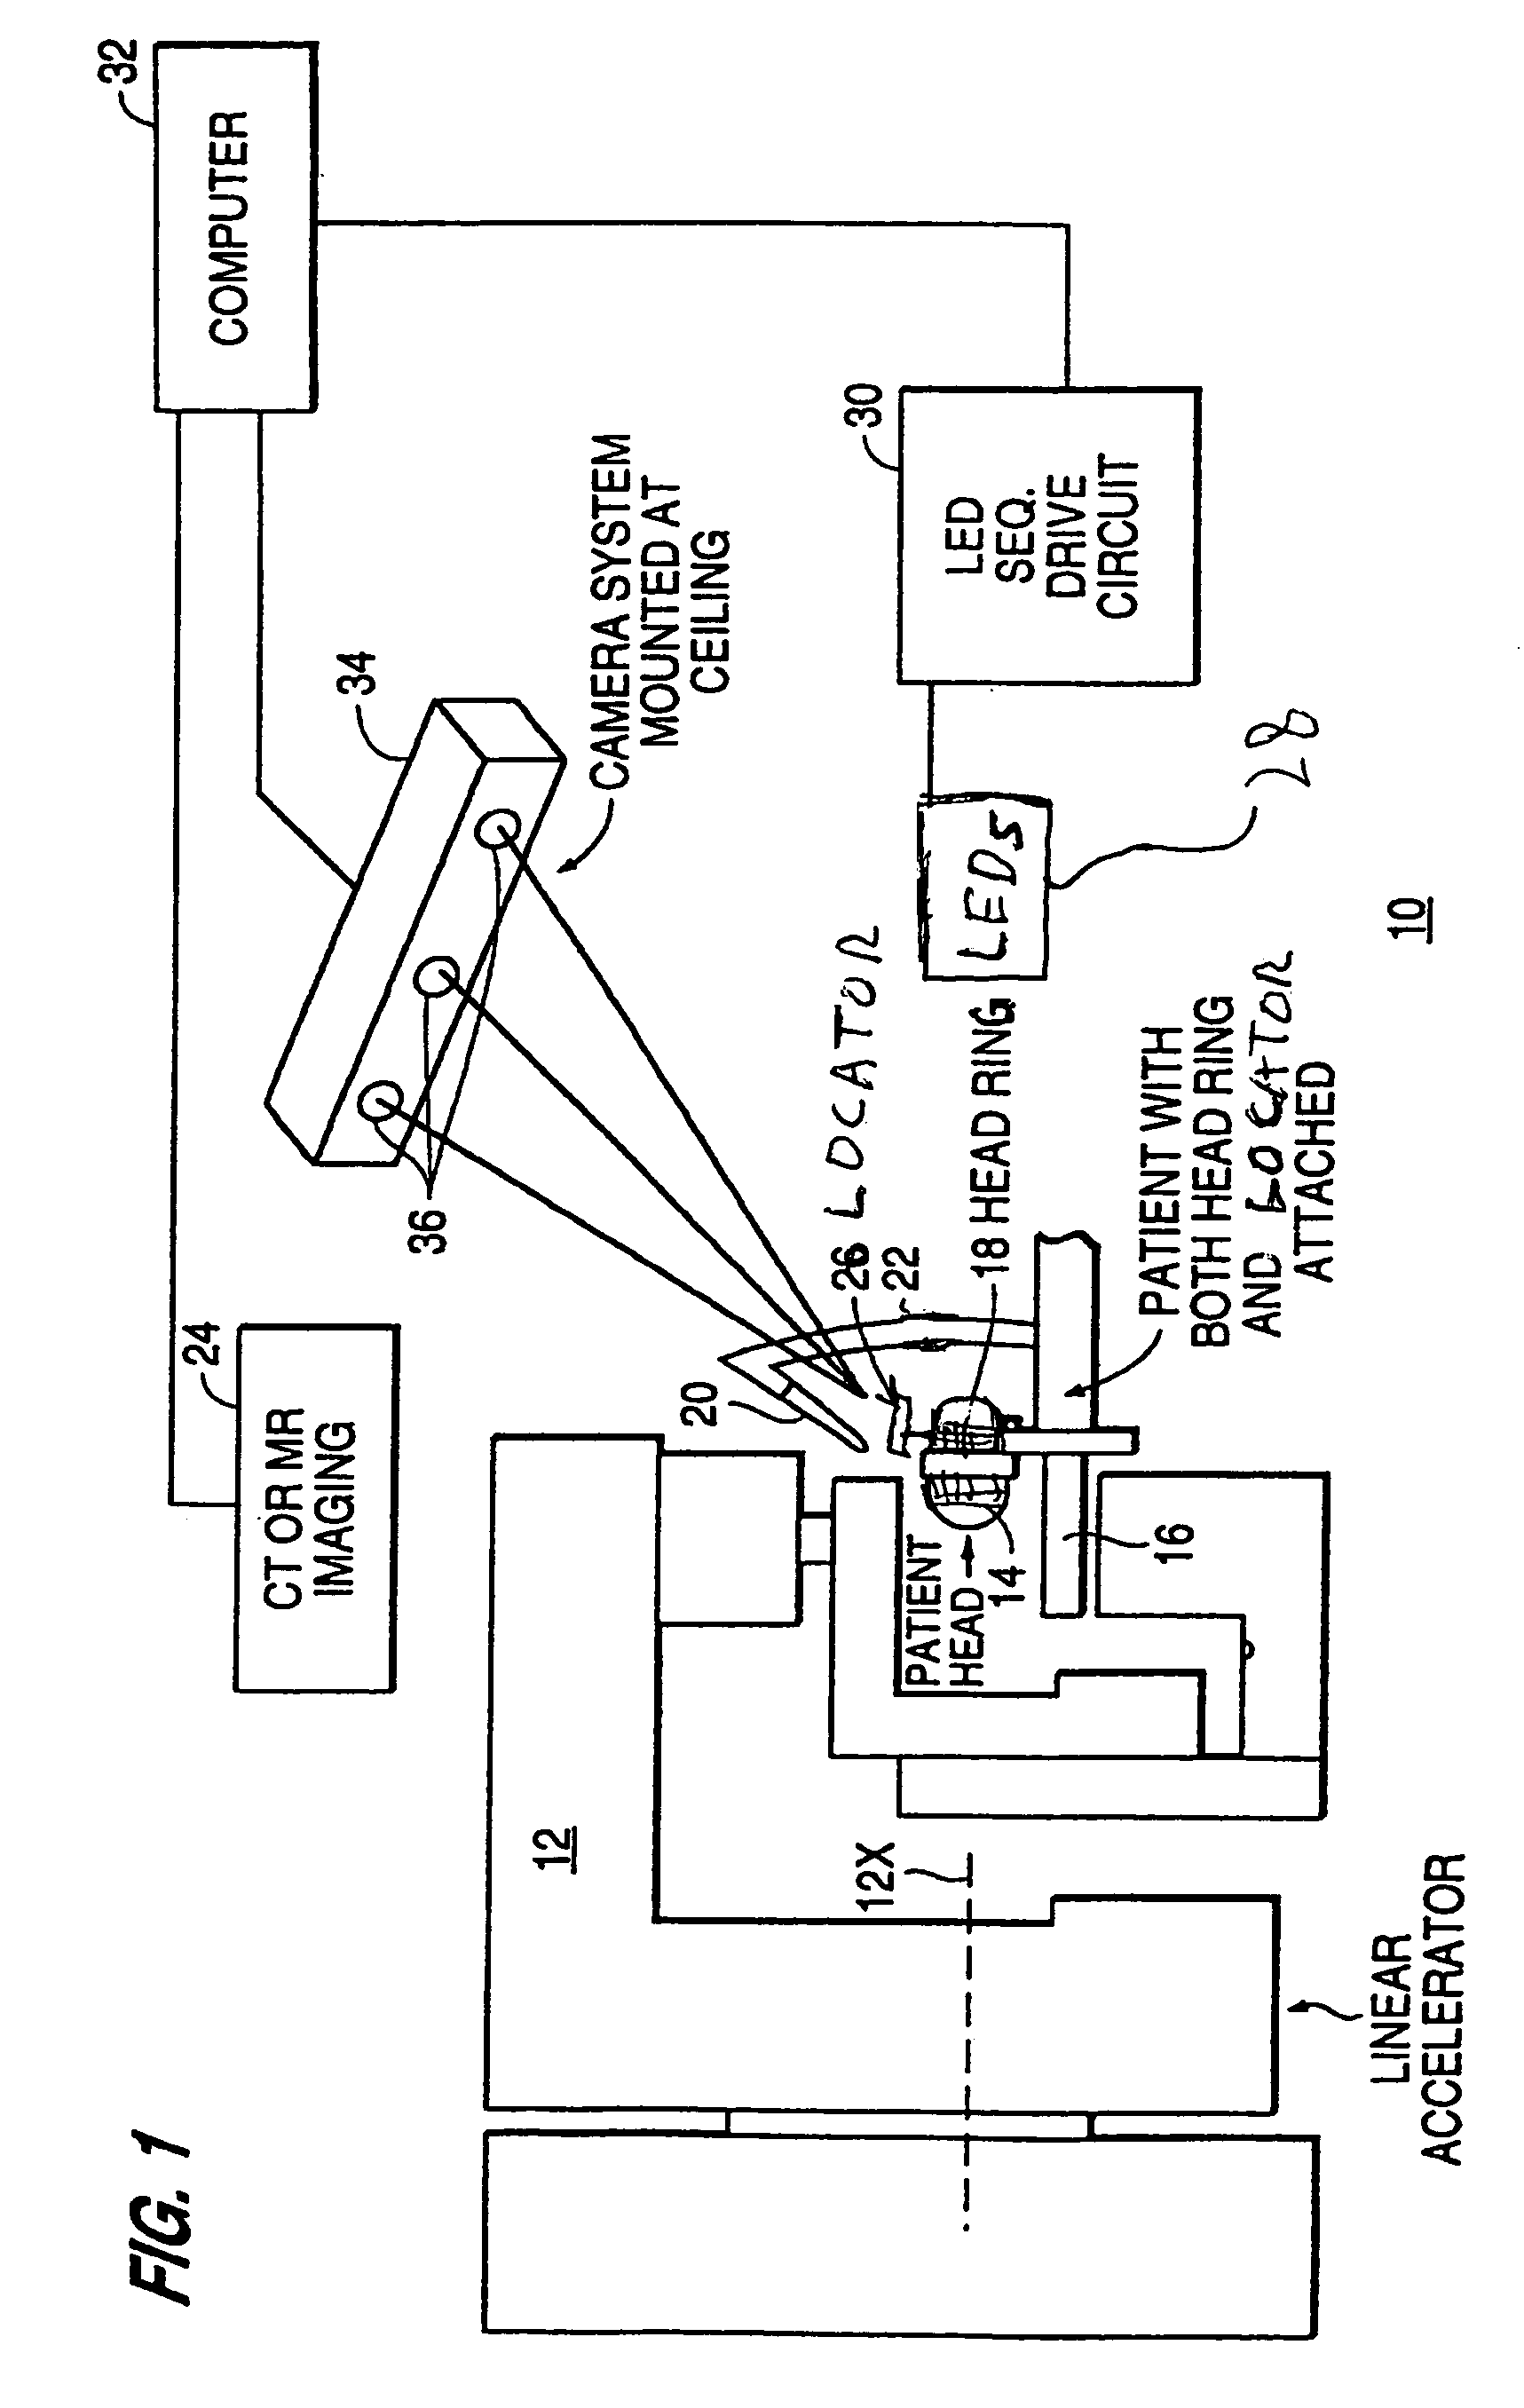 Mask system and method for stereotactic radiotherapy and image guided procedures